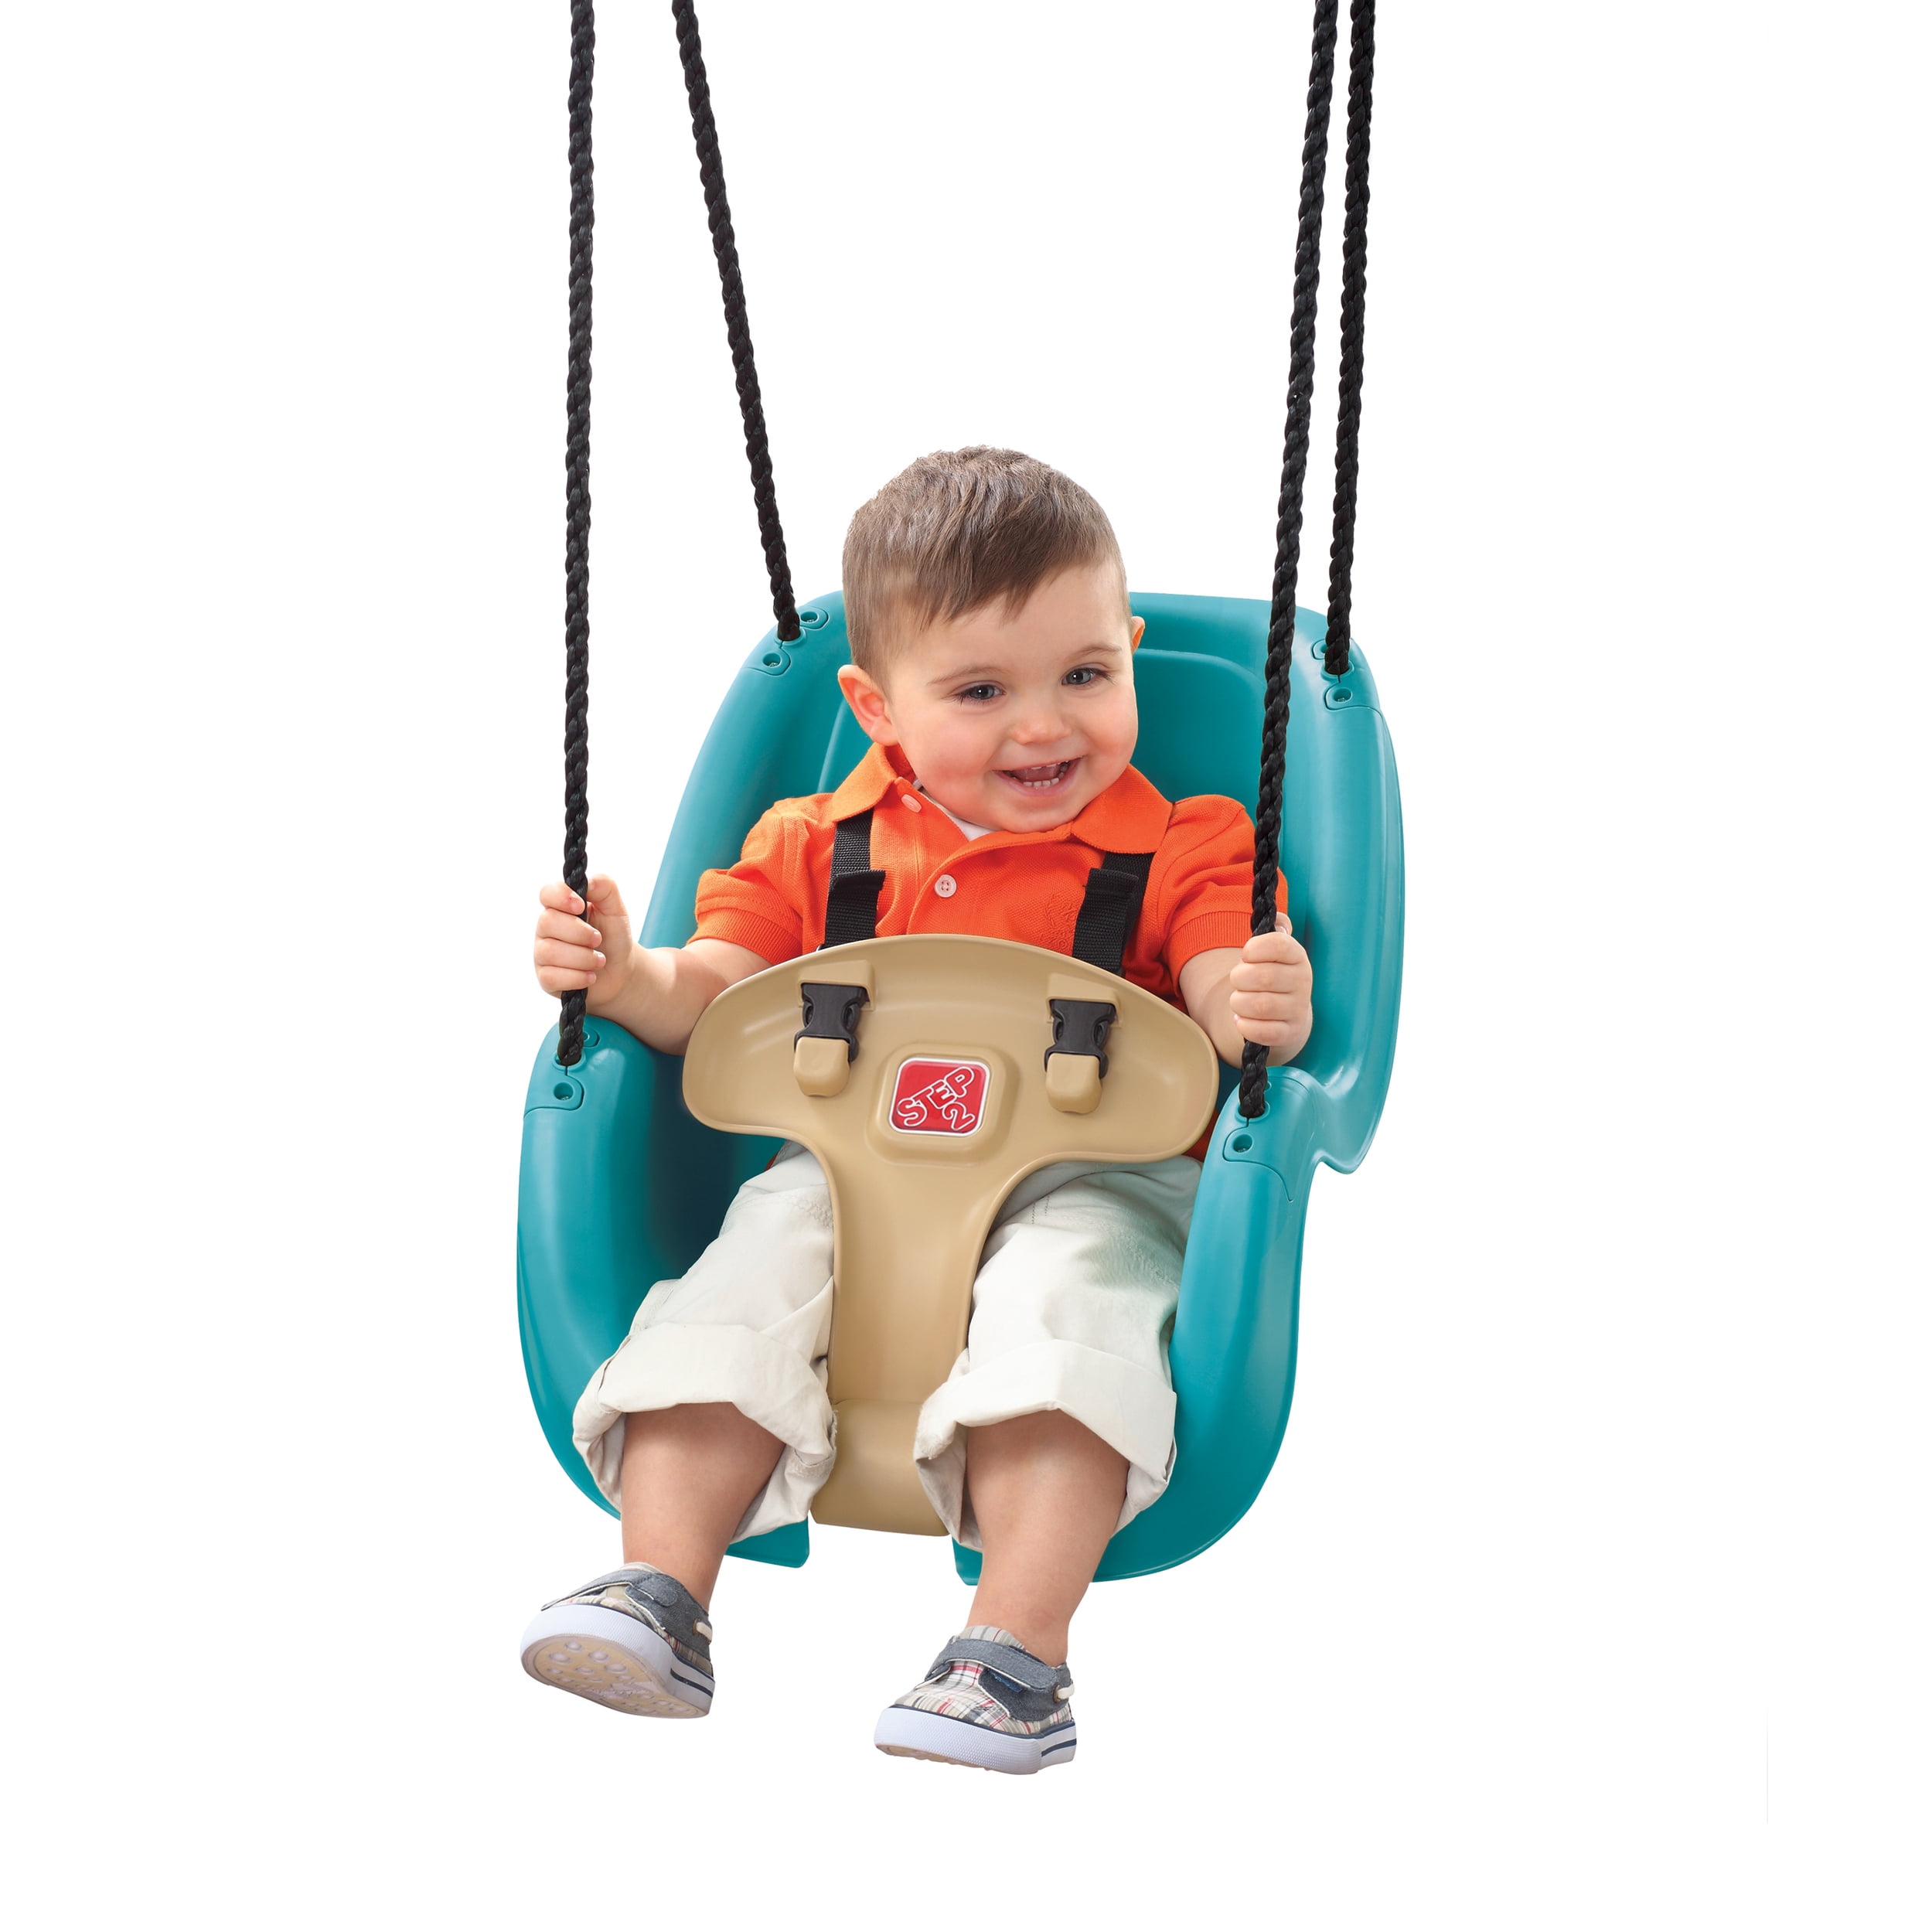 Step2 Teal Toddler Baby Swing Set Accessory with T-Bar and Weather-Resistant Ropes - 1